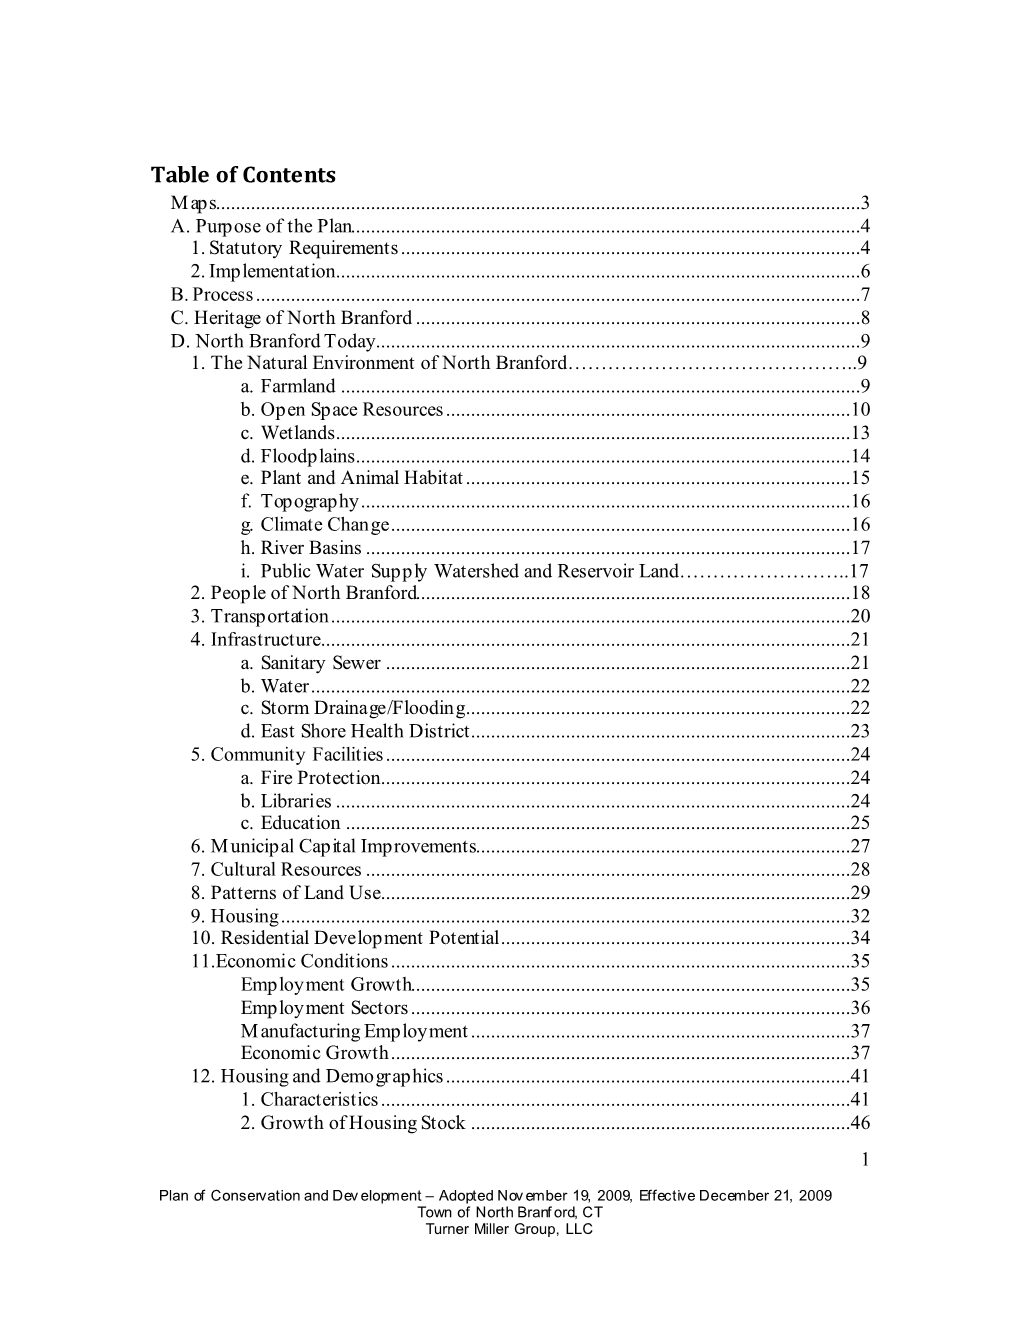 Table of Contents Maps